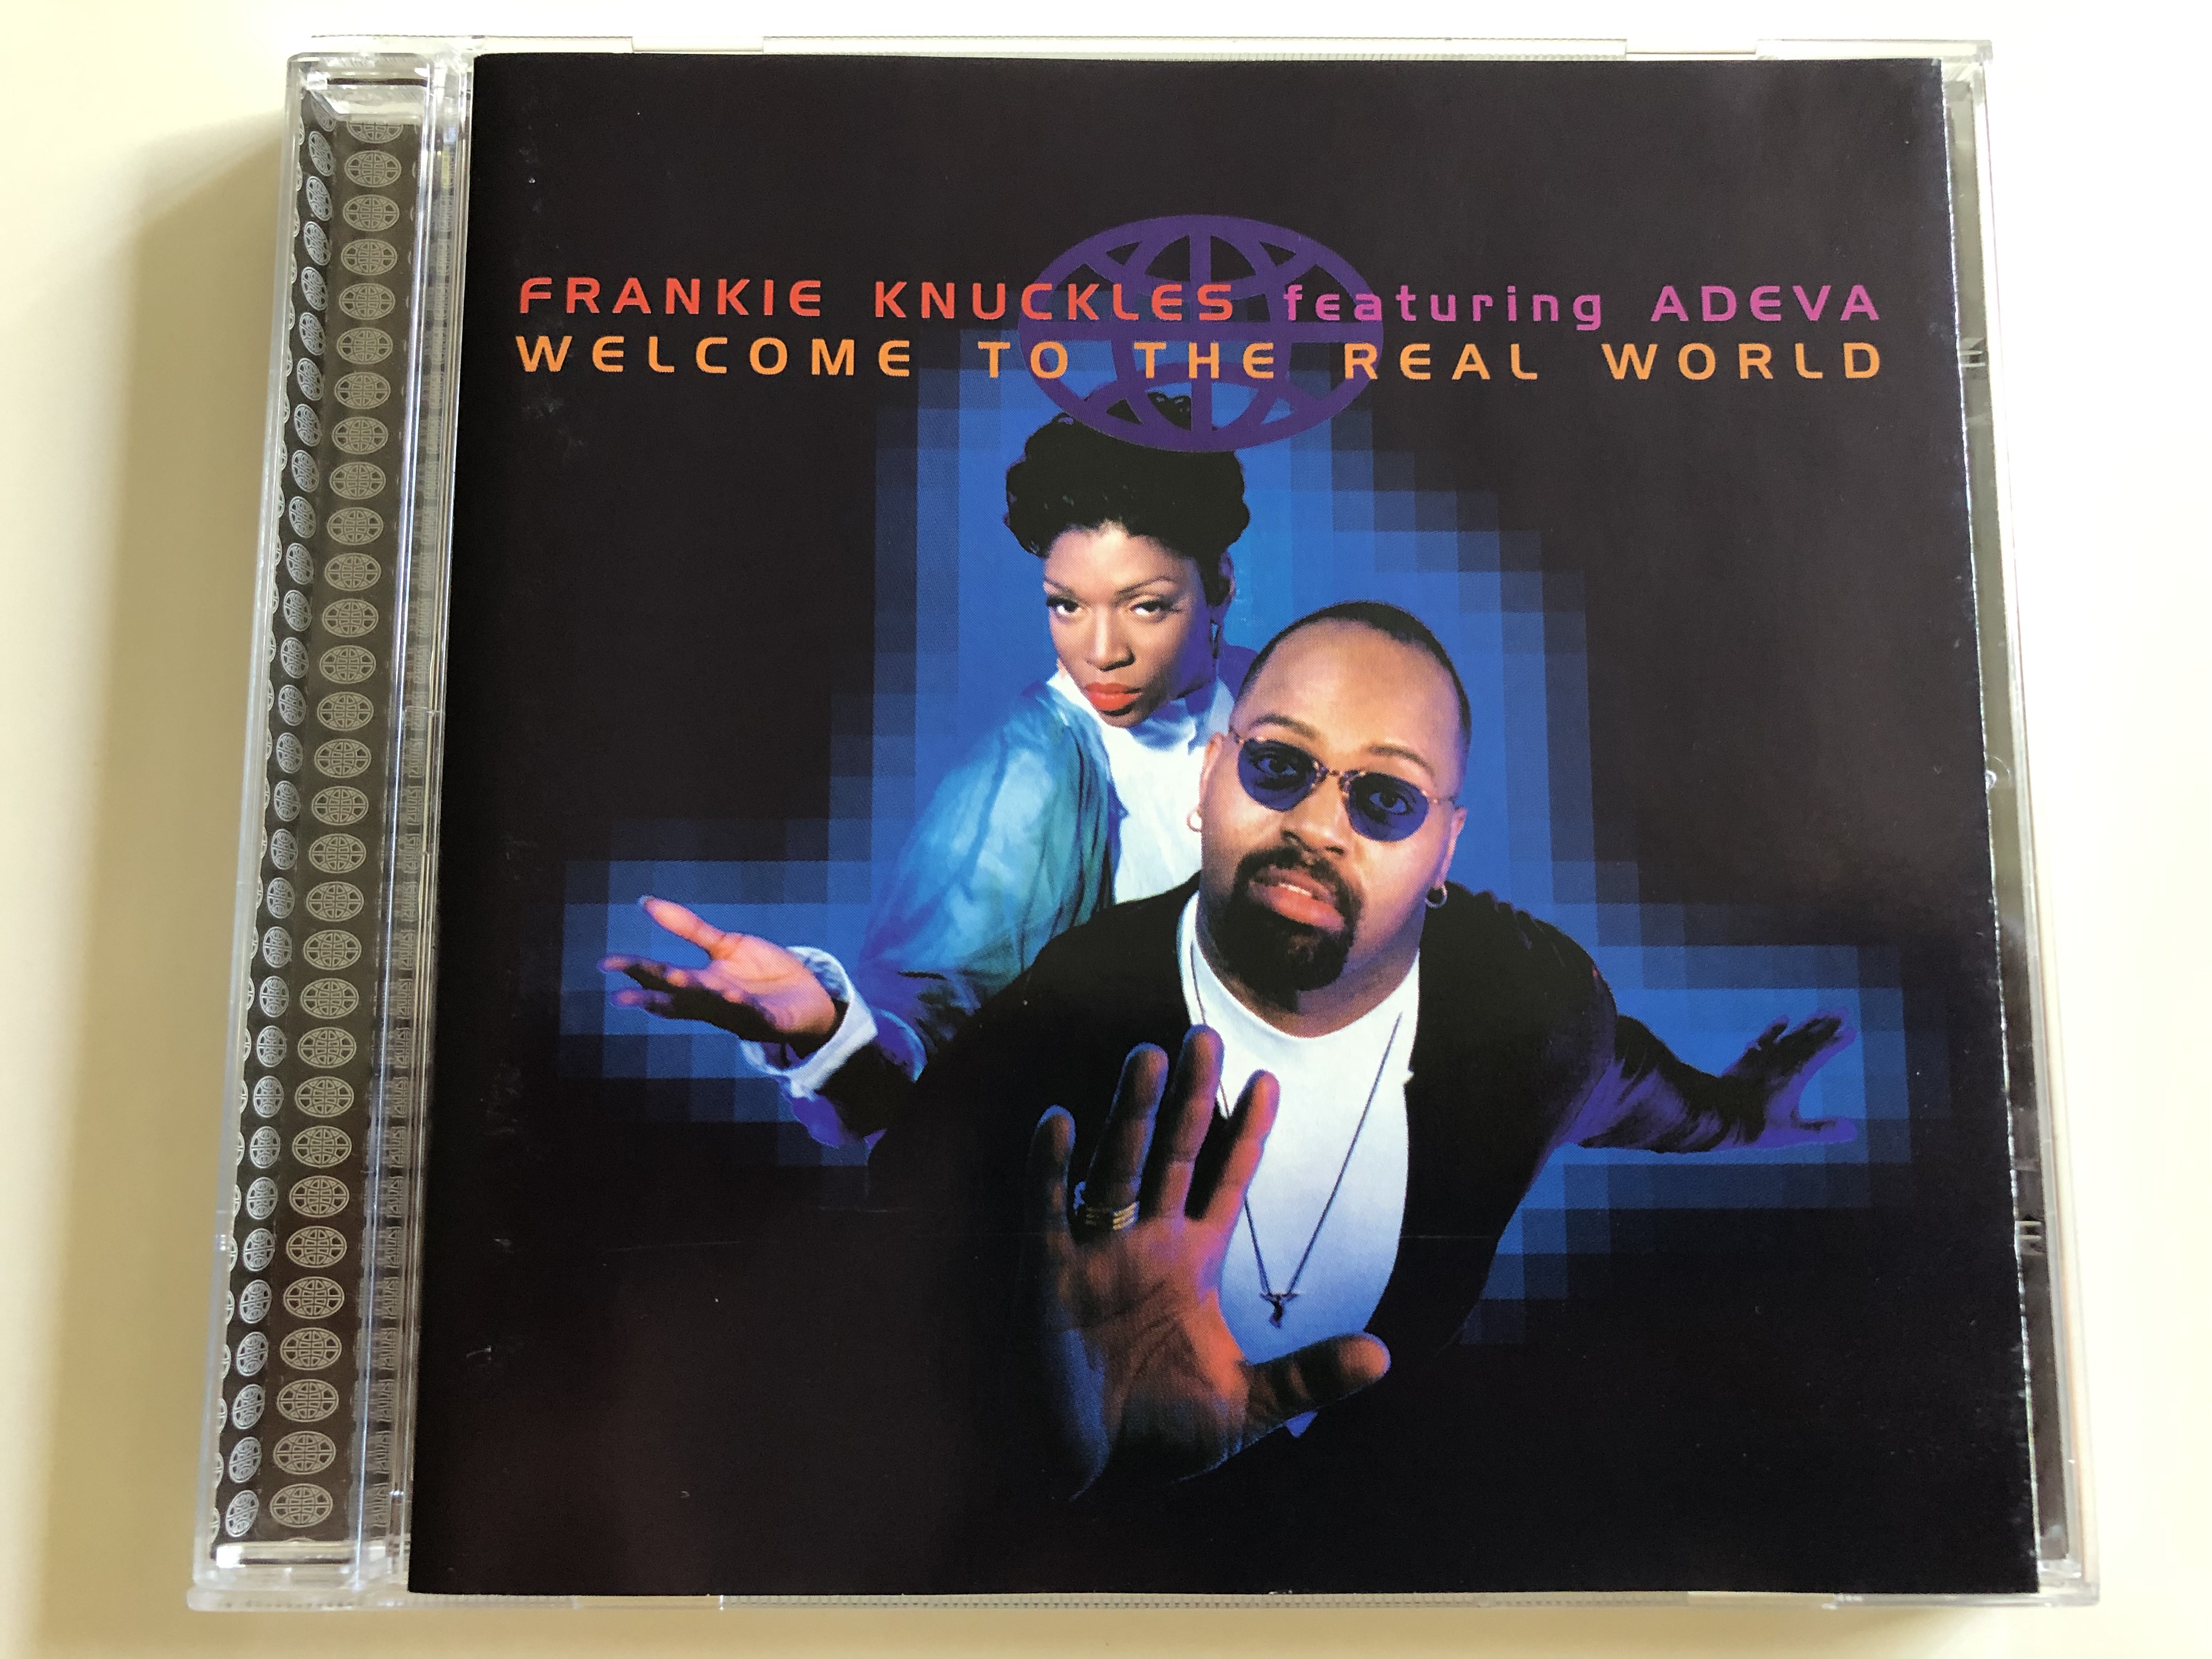 frankie-knuckles-featuring-adeva-welcome-to-the-real-world-audio-cd-1995-virgin-1-.jpg